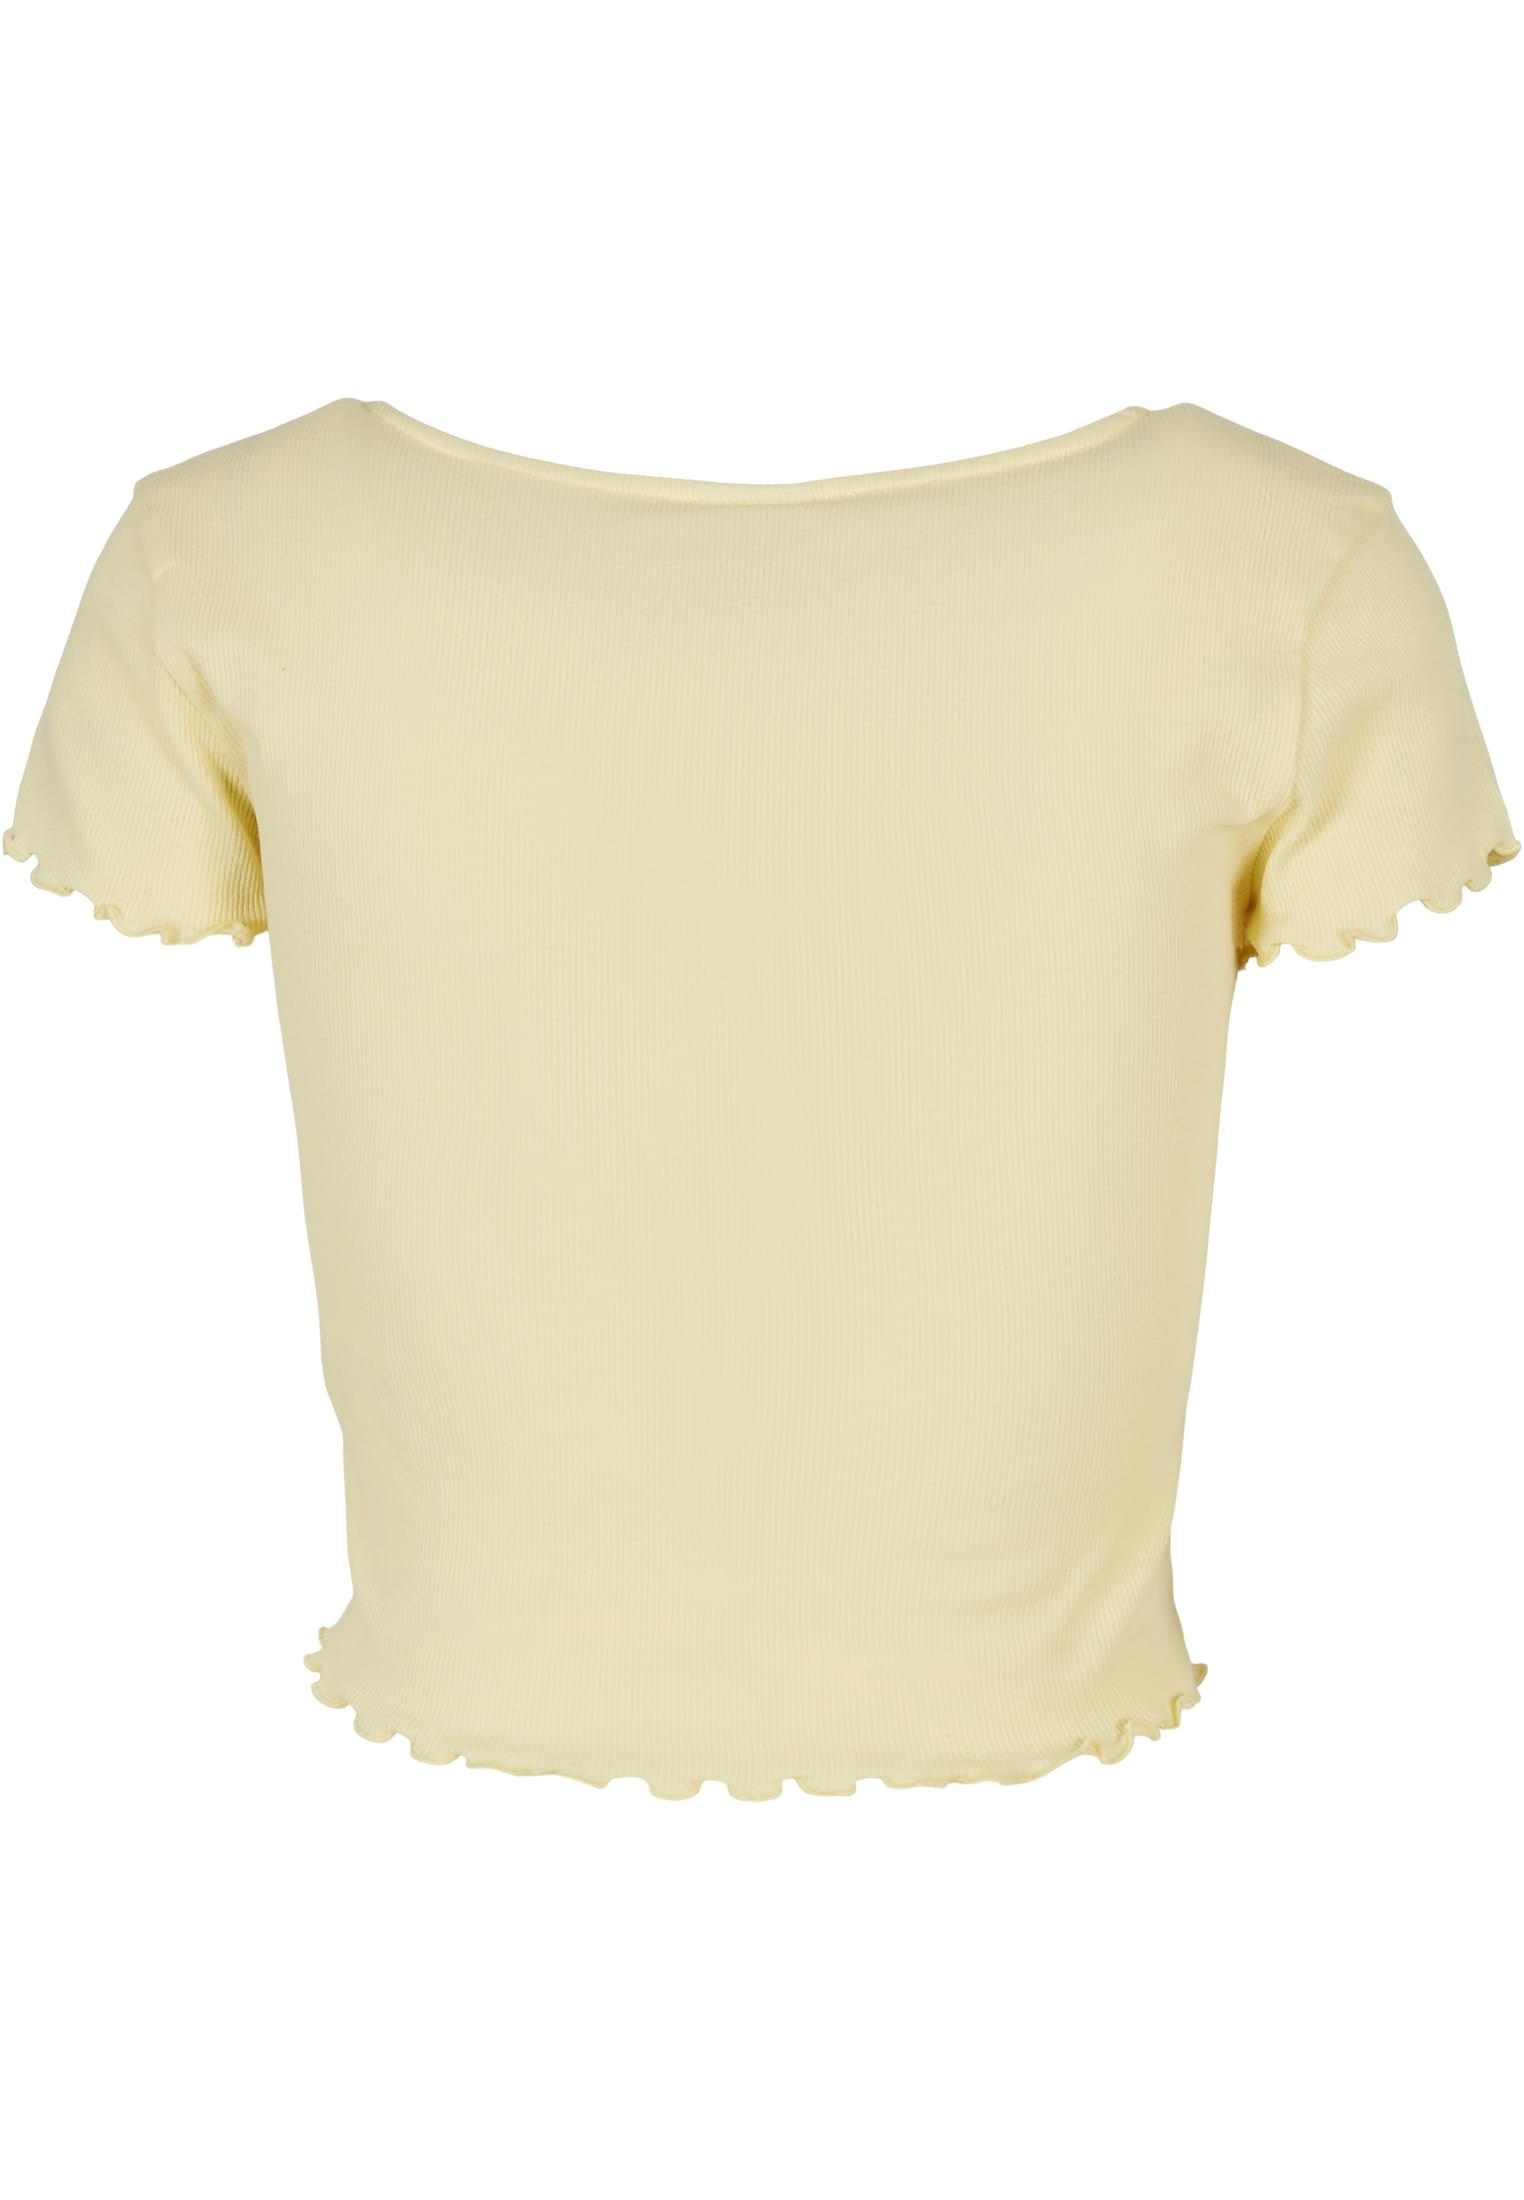 Frauen Ladies Cropped Button Up Rib Tee in Farbe softyellow